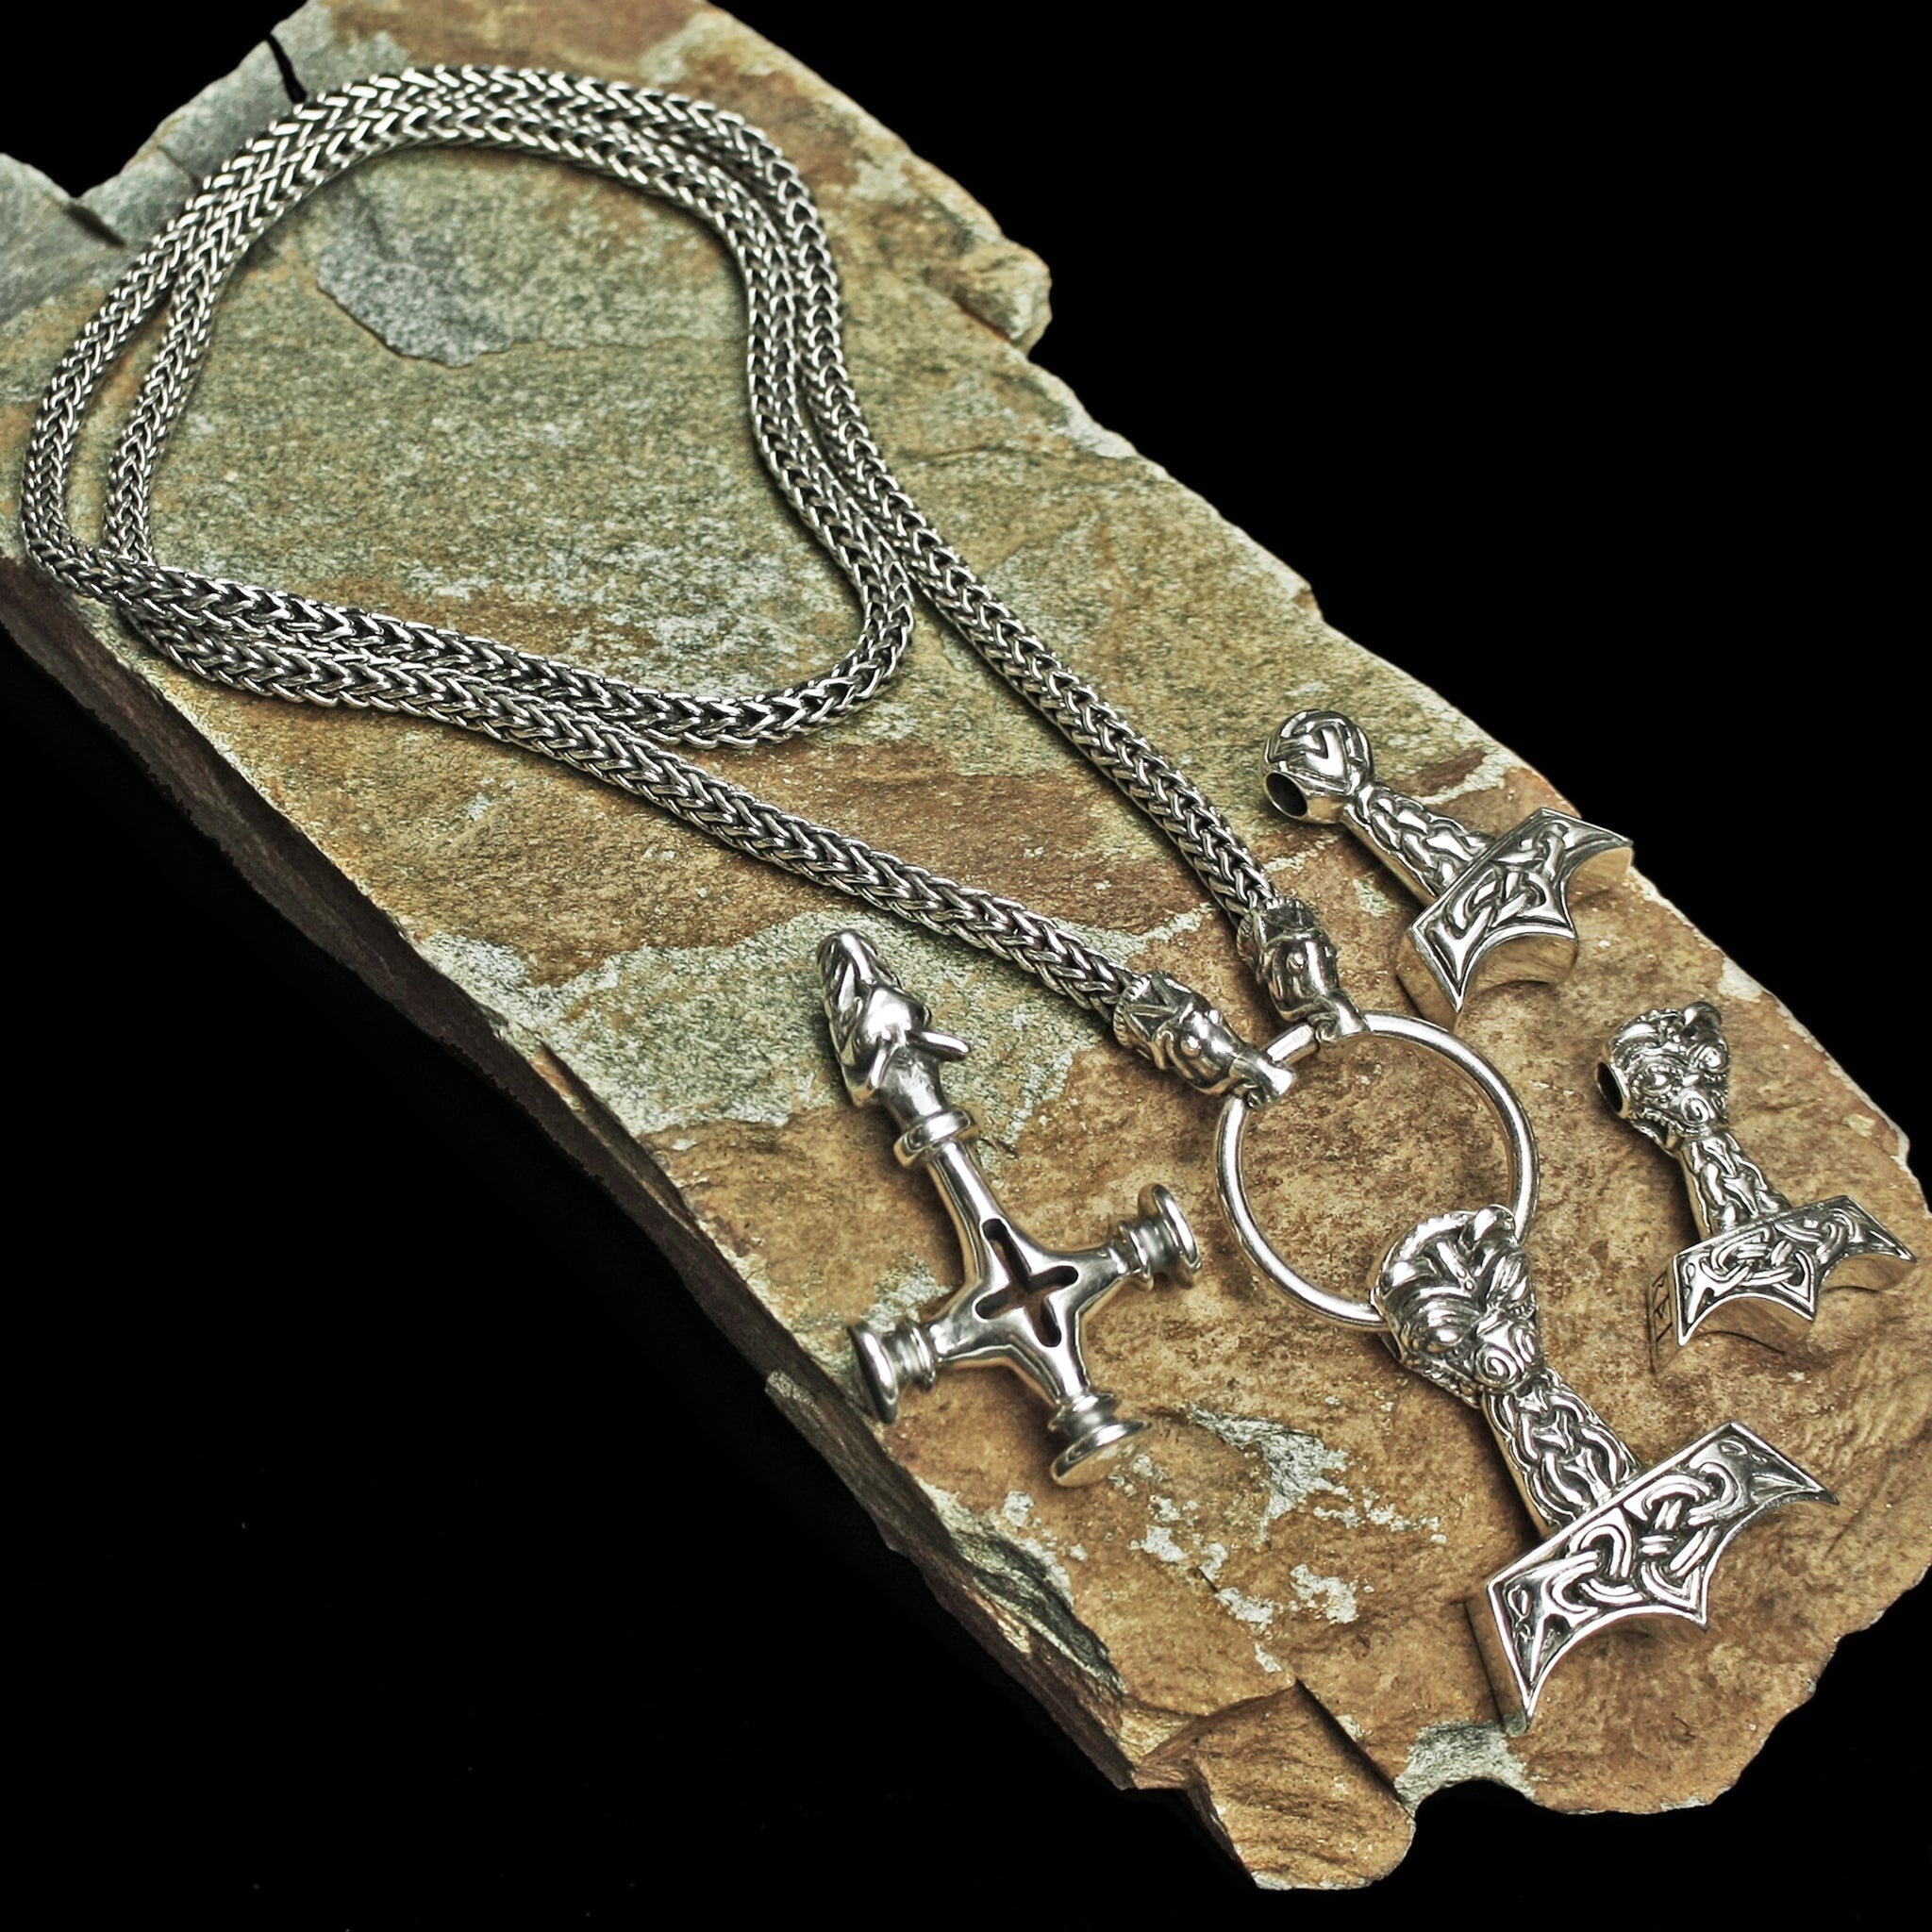 Silver Thor's Hammer Necklace with Gotlandic Dragon Heads and choice of Thor's Hammers- Viking Jewelry